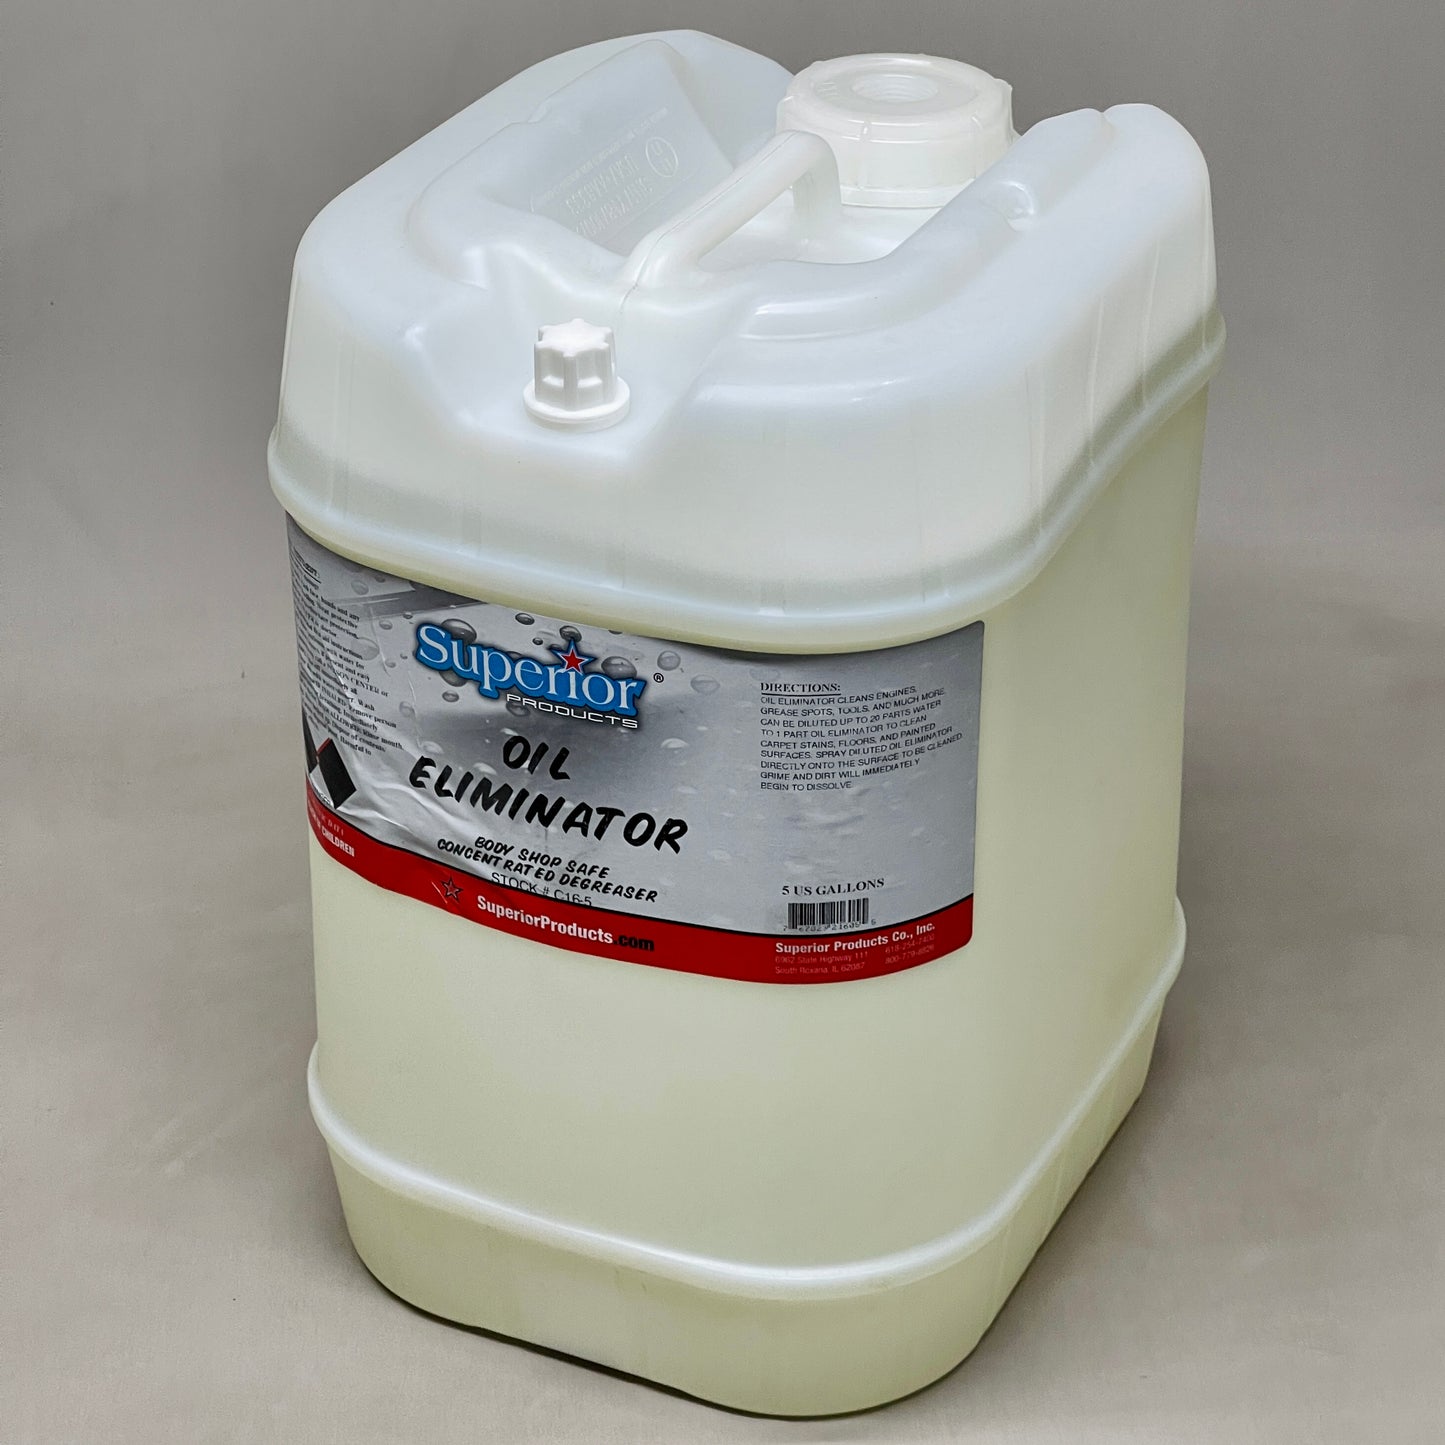 Z@ SUPERIOR PRODUCTS Oil Eliminator Concentrated Degreaser 5 Gallons C16-5 (New)